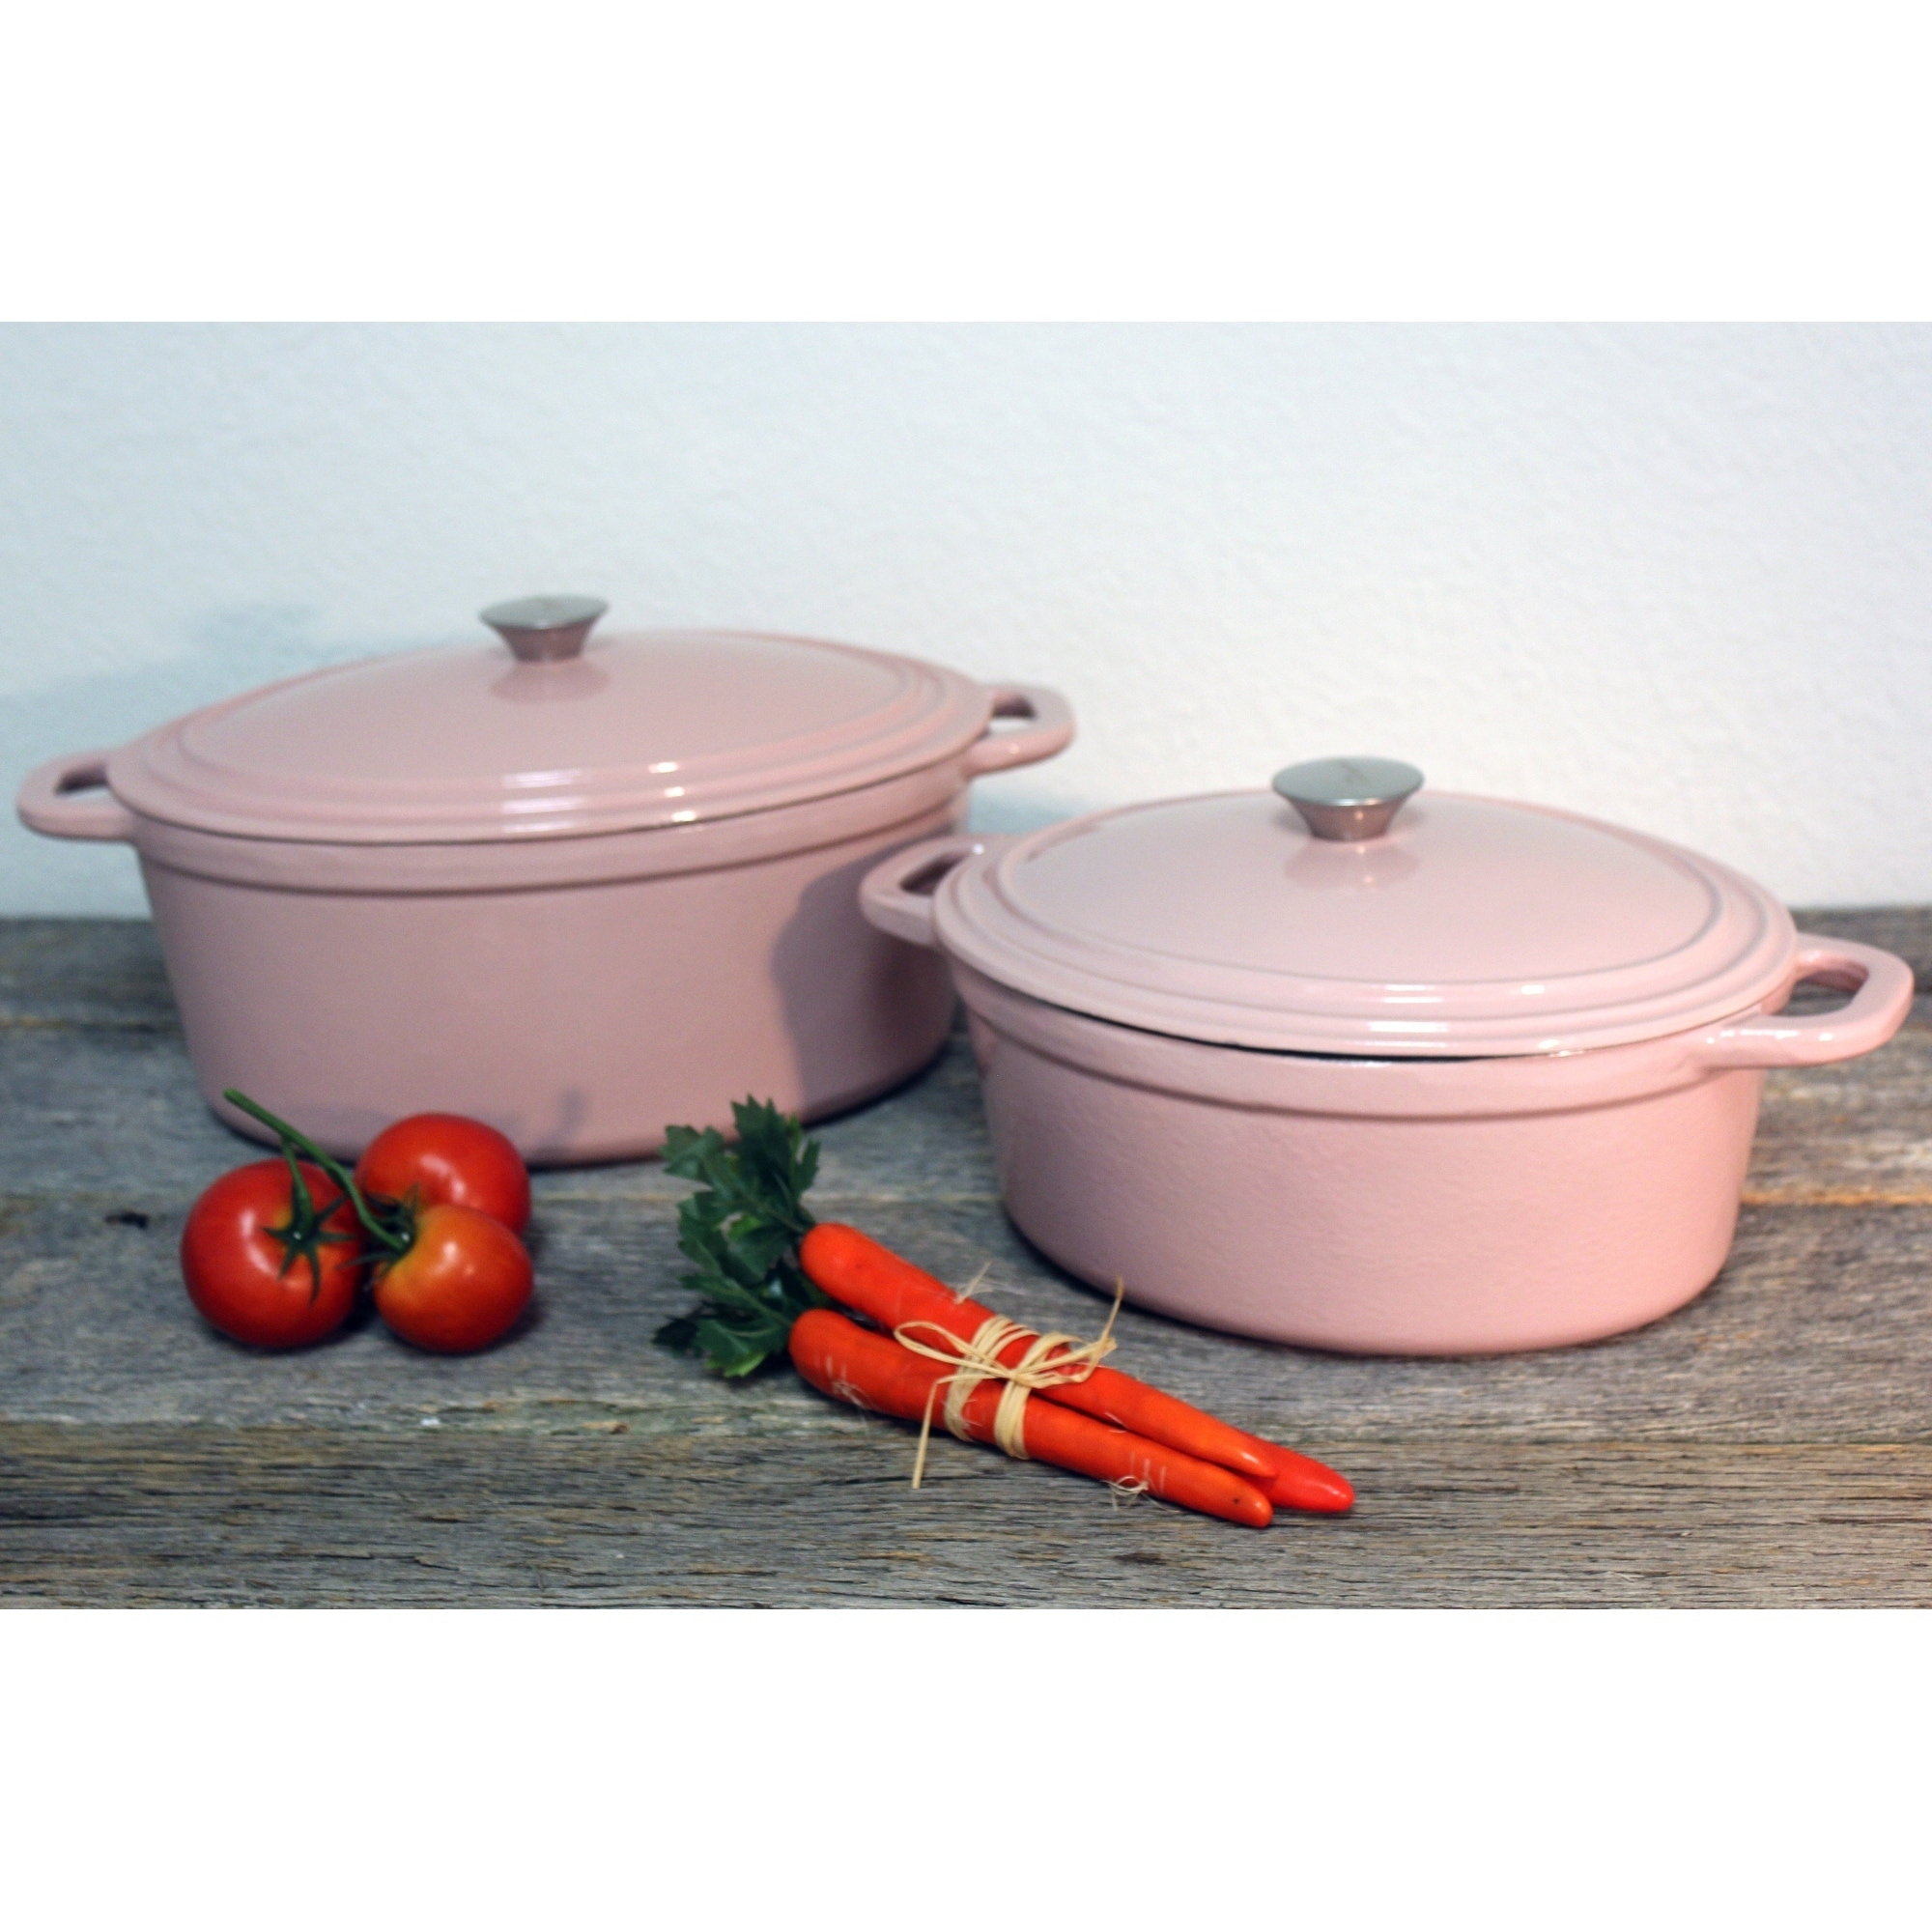 BergHOFF Neo 3PC Cast Iron Set: 3qt. Covered Dutch Oven & 11 Grill Pan, Pink